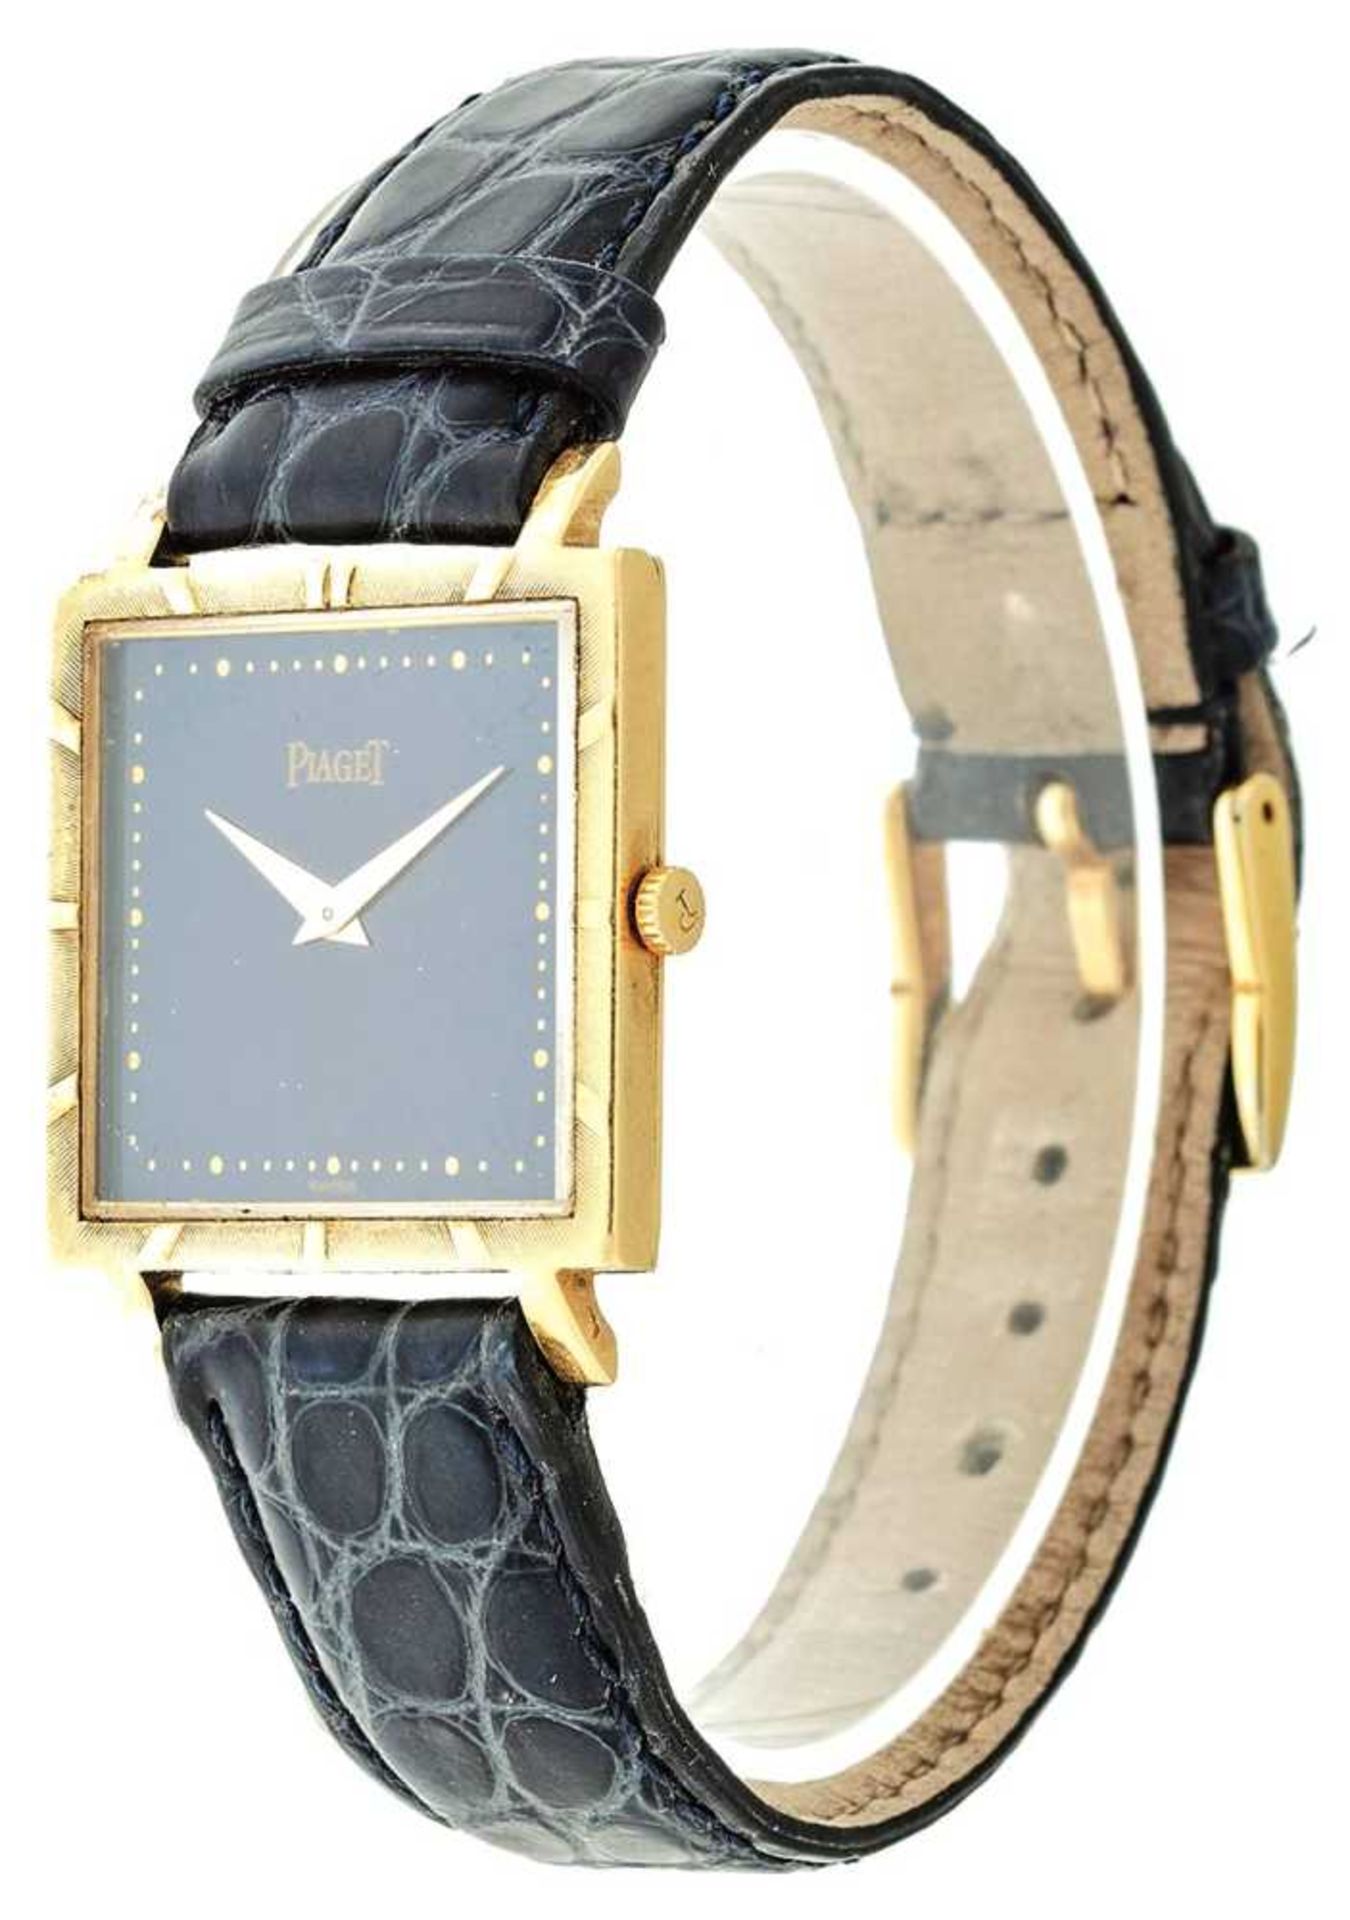 Piaget Protocolle womens watch. About 1960, 585er yellow gold case, Ser. Number: 927 / 82448, Lapis